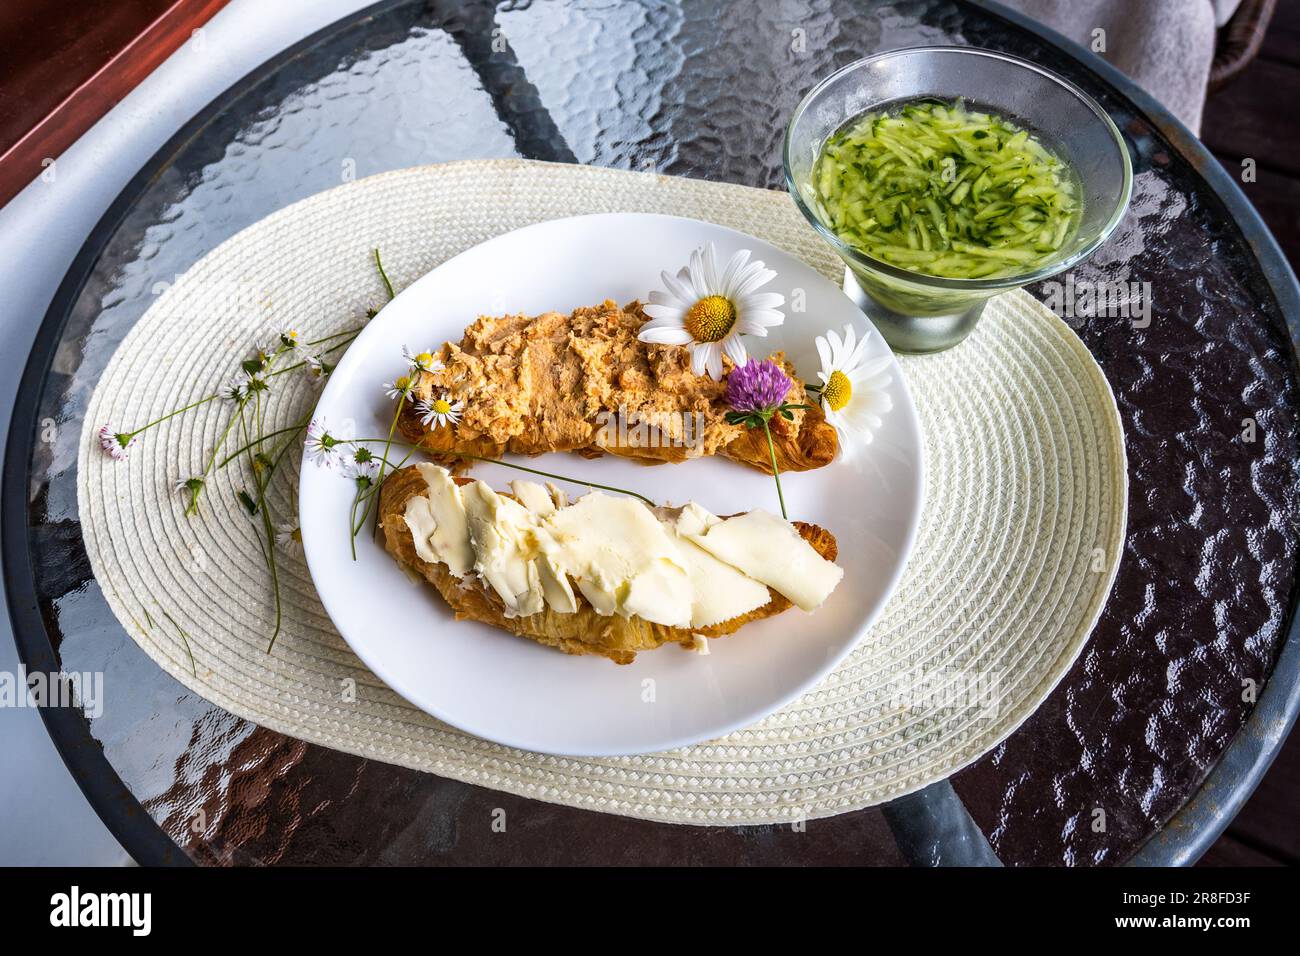 Two piece of croissant with butter and tuna spread on white plate, flowers sprinkled on pad, cucumber salad on circle glass table. Healthy breakfast o Stock Photo